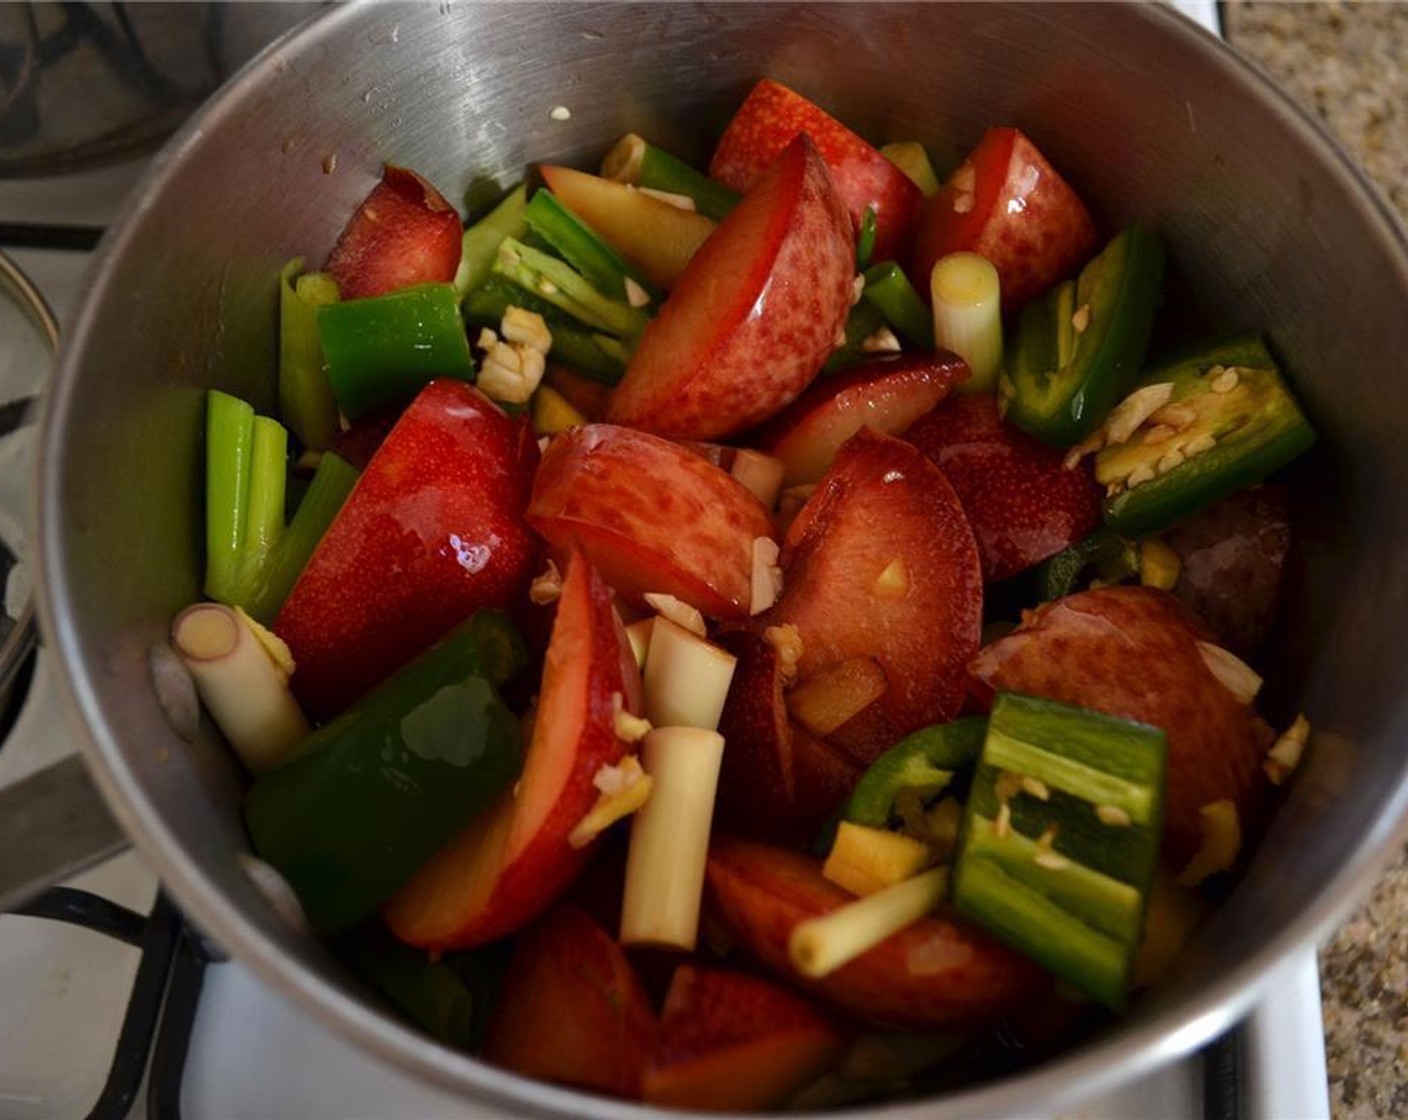 step 6 Combine the plums, ginger, lemongrass, chili pepper, scallion, Garlic (2 cloves), Soy Sauce (1/4 cup), Sweet Soy Sauce (1/4 cup), Honey (1/4 cup), Rice Vinegar (2 Tbsp), juice from the Lemon (1/2), and Water (1 cup) in a heavy saucepan and bring to a rolling boil over medium heat.